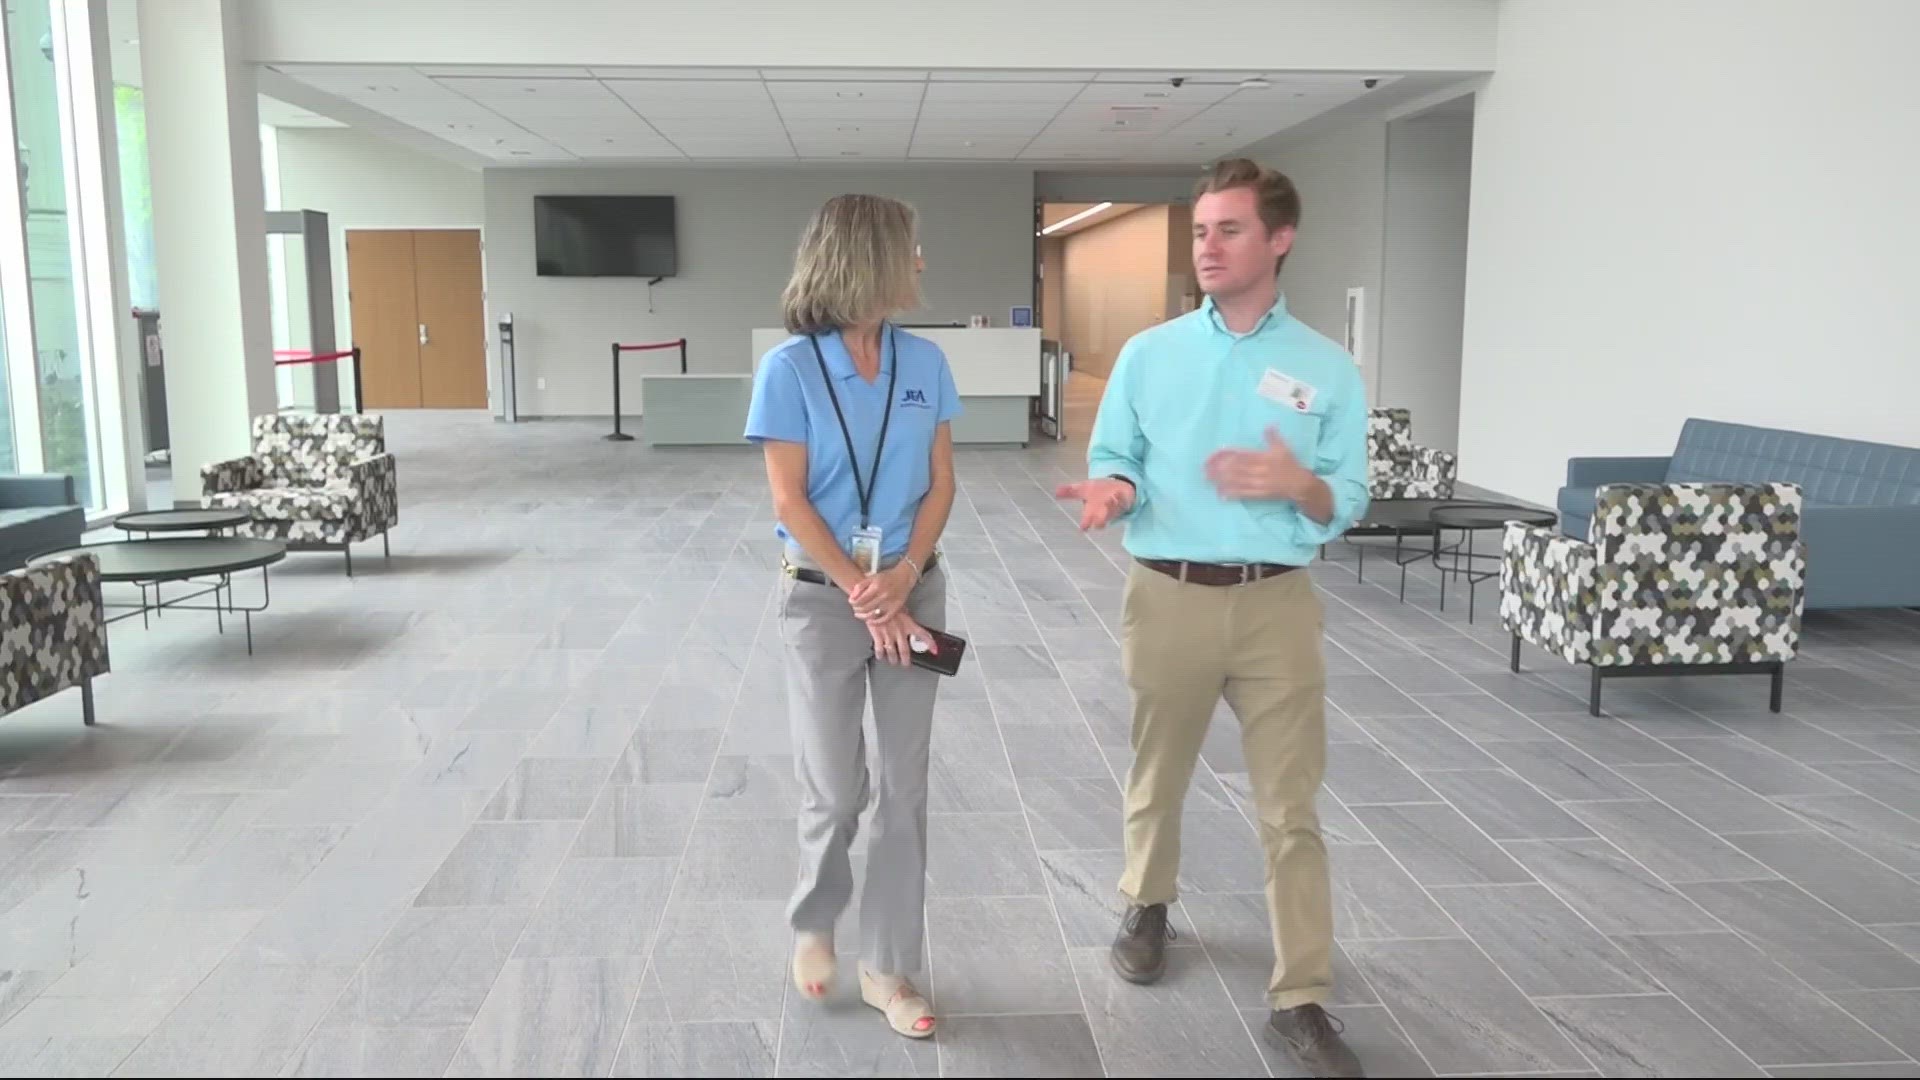 On Your Side's Zach Wilcox got a tour of the new JEA facility in Downtown Jacksonville!